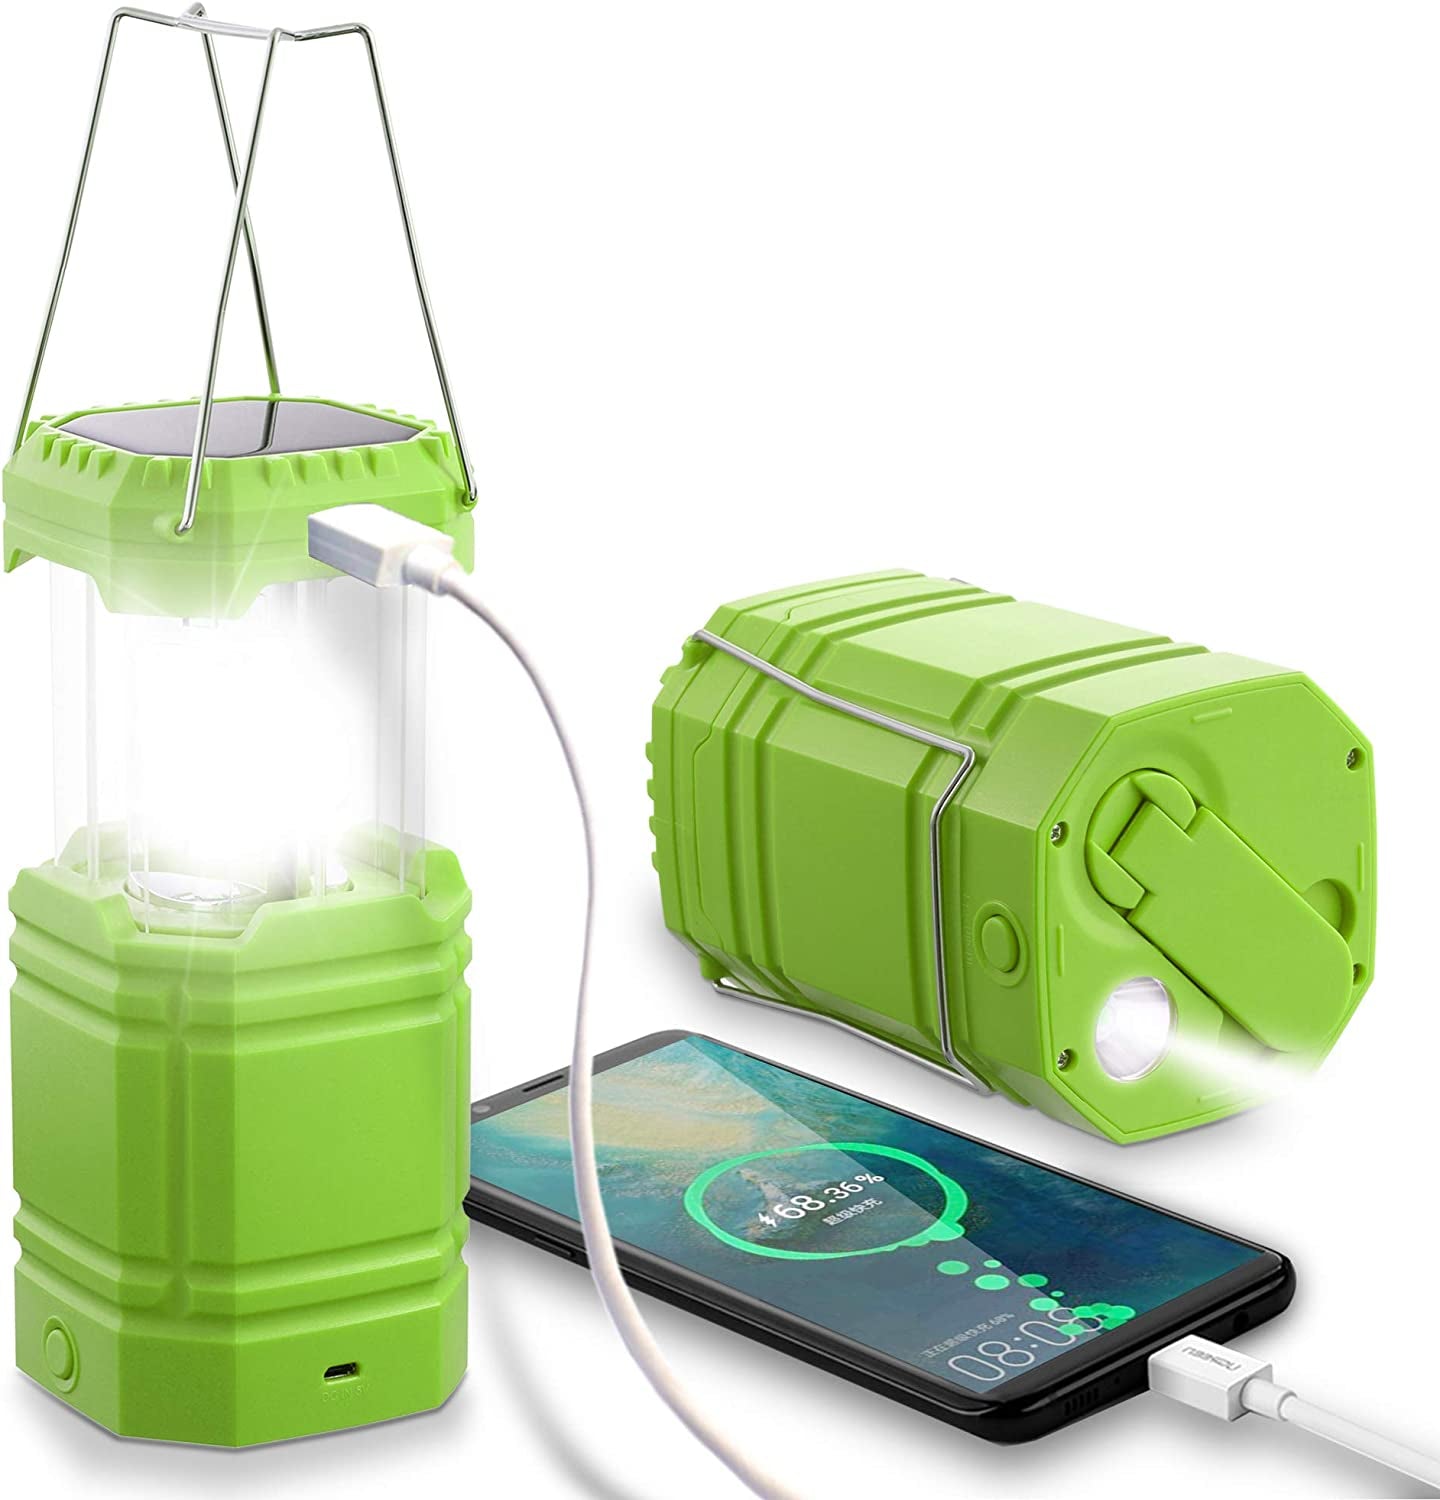 The Ultimate Solar Powered Survival LED Lantern